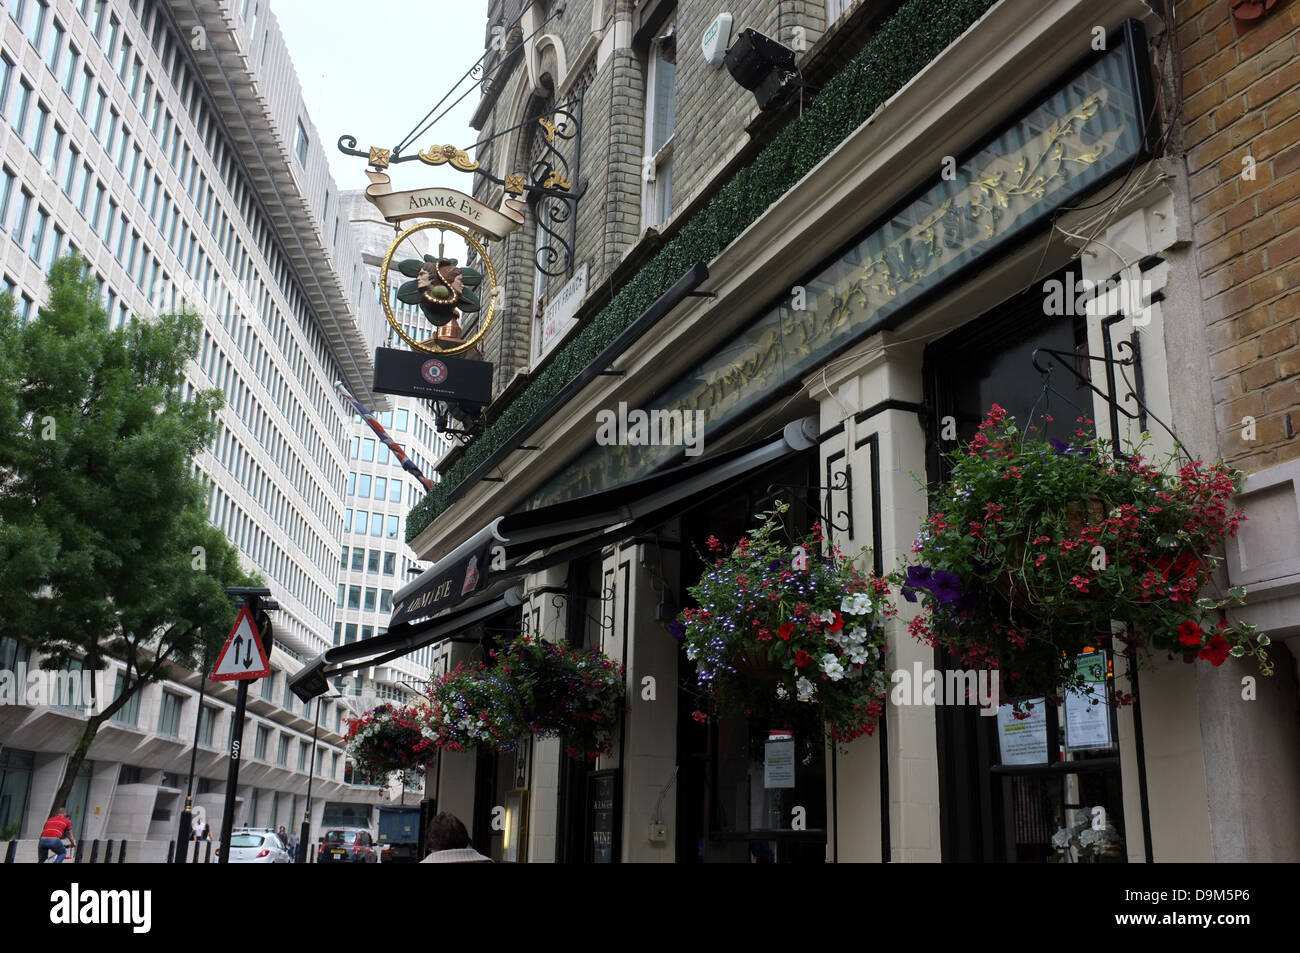 adam and eve tavern city of westminster london uk 2013 Stock Photo